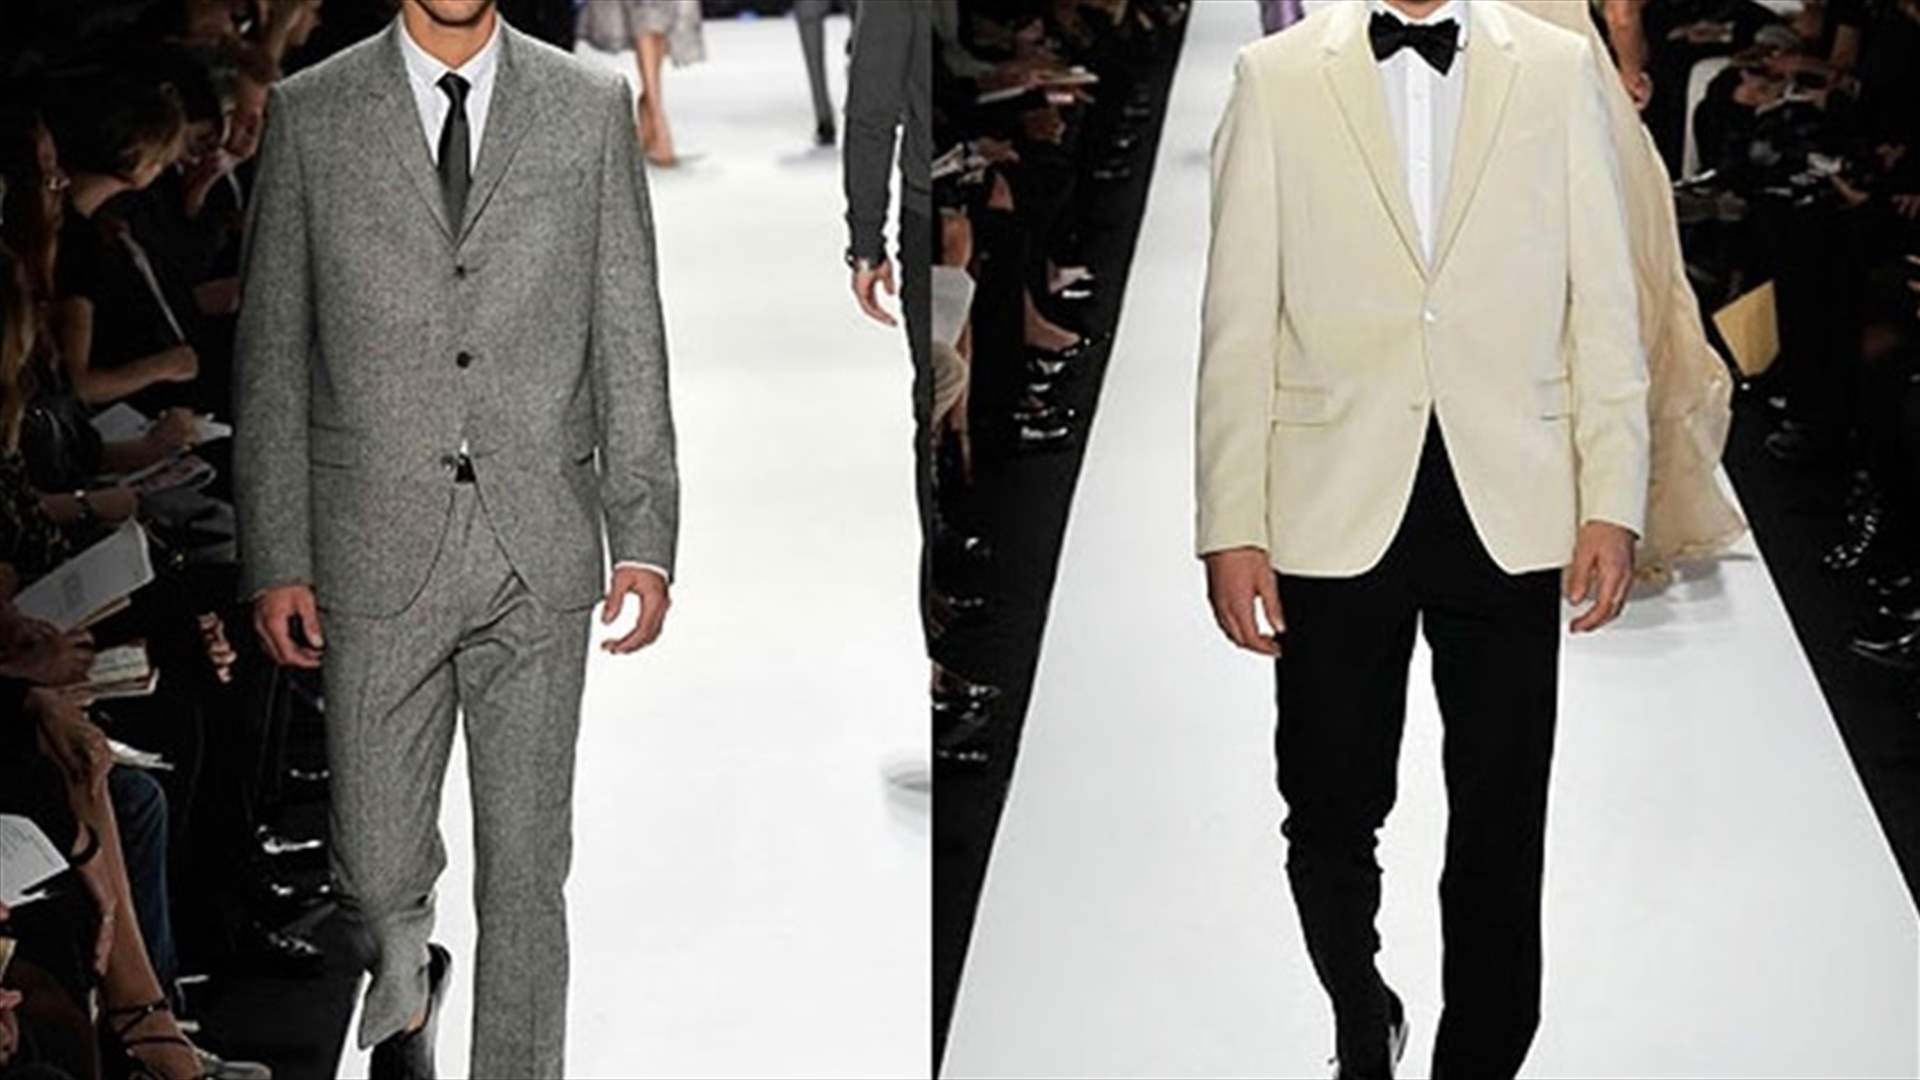 Out of fashion: how men could fall off the catwalk